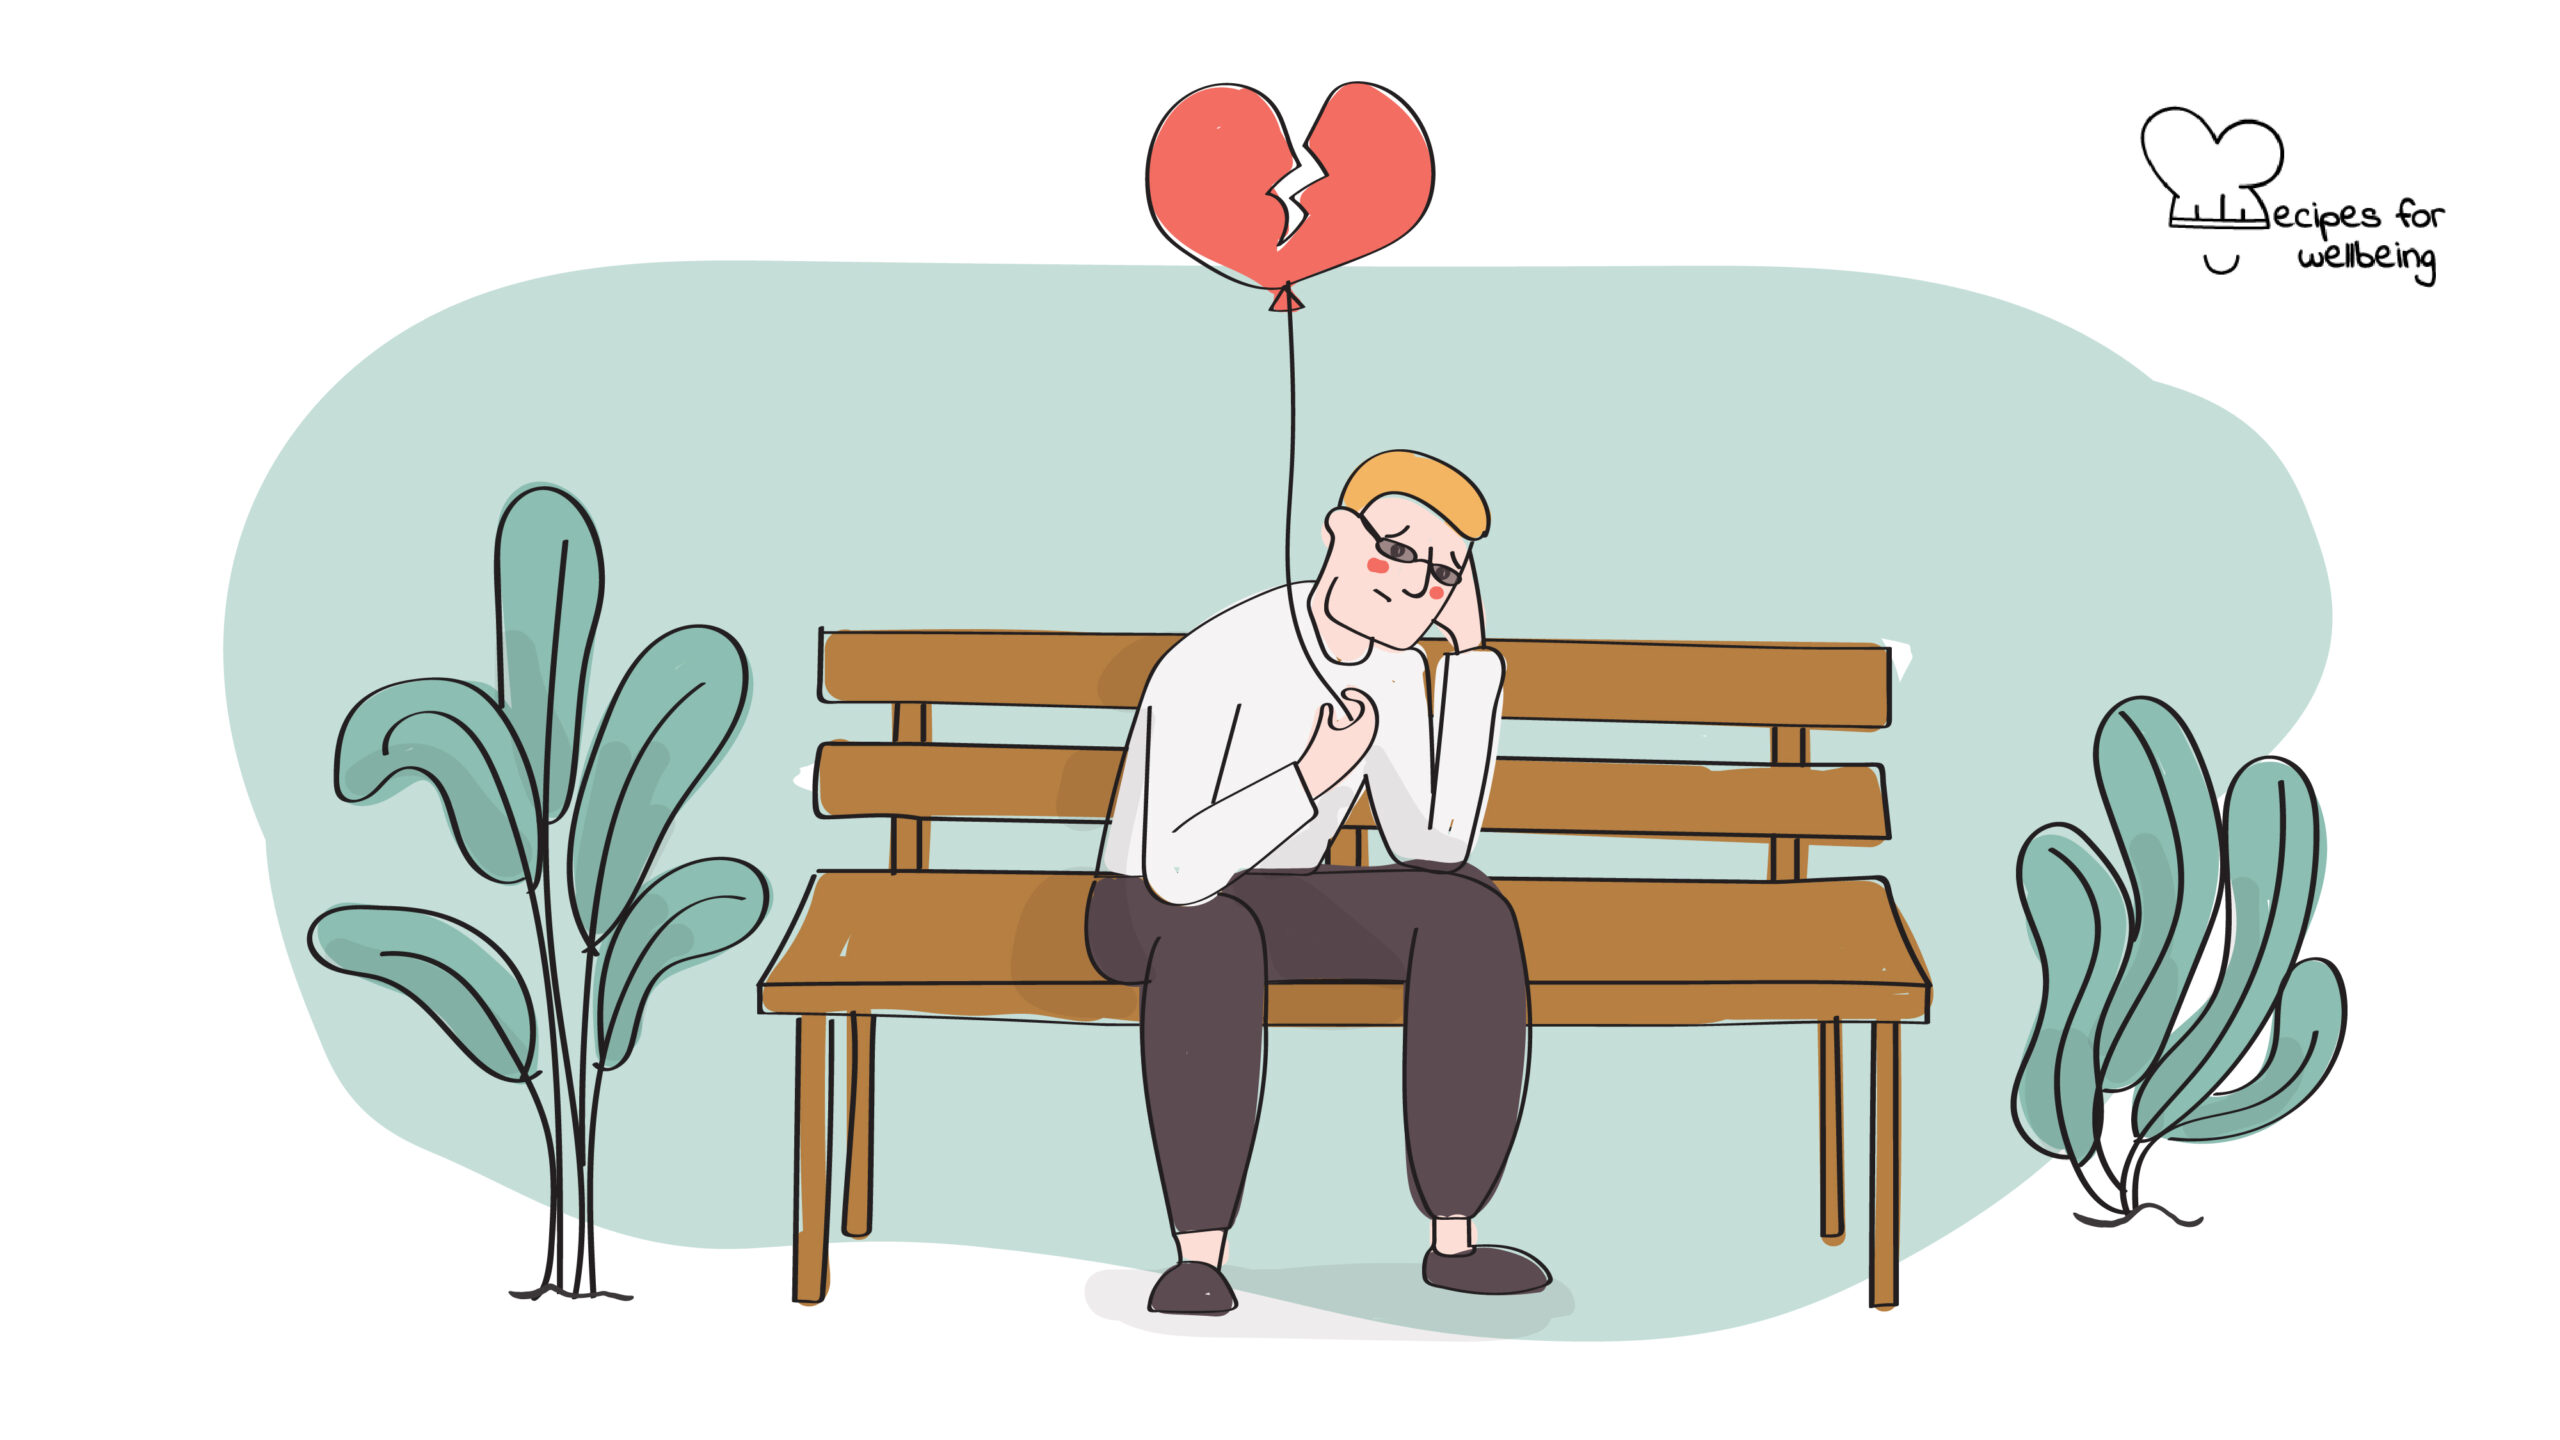 Illustration of a person with a sad expression sitting on a bench and holding a balloon in the shape of a broken heart. © Recipes for Wellbeing